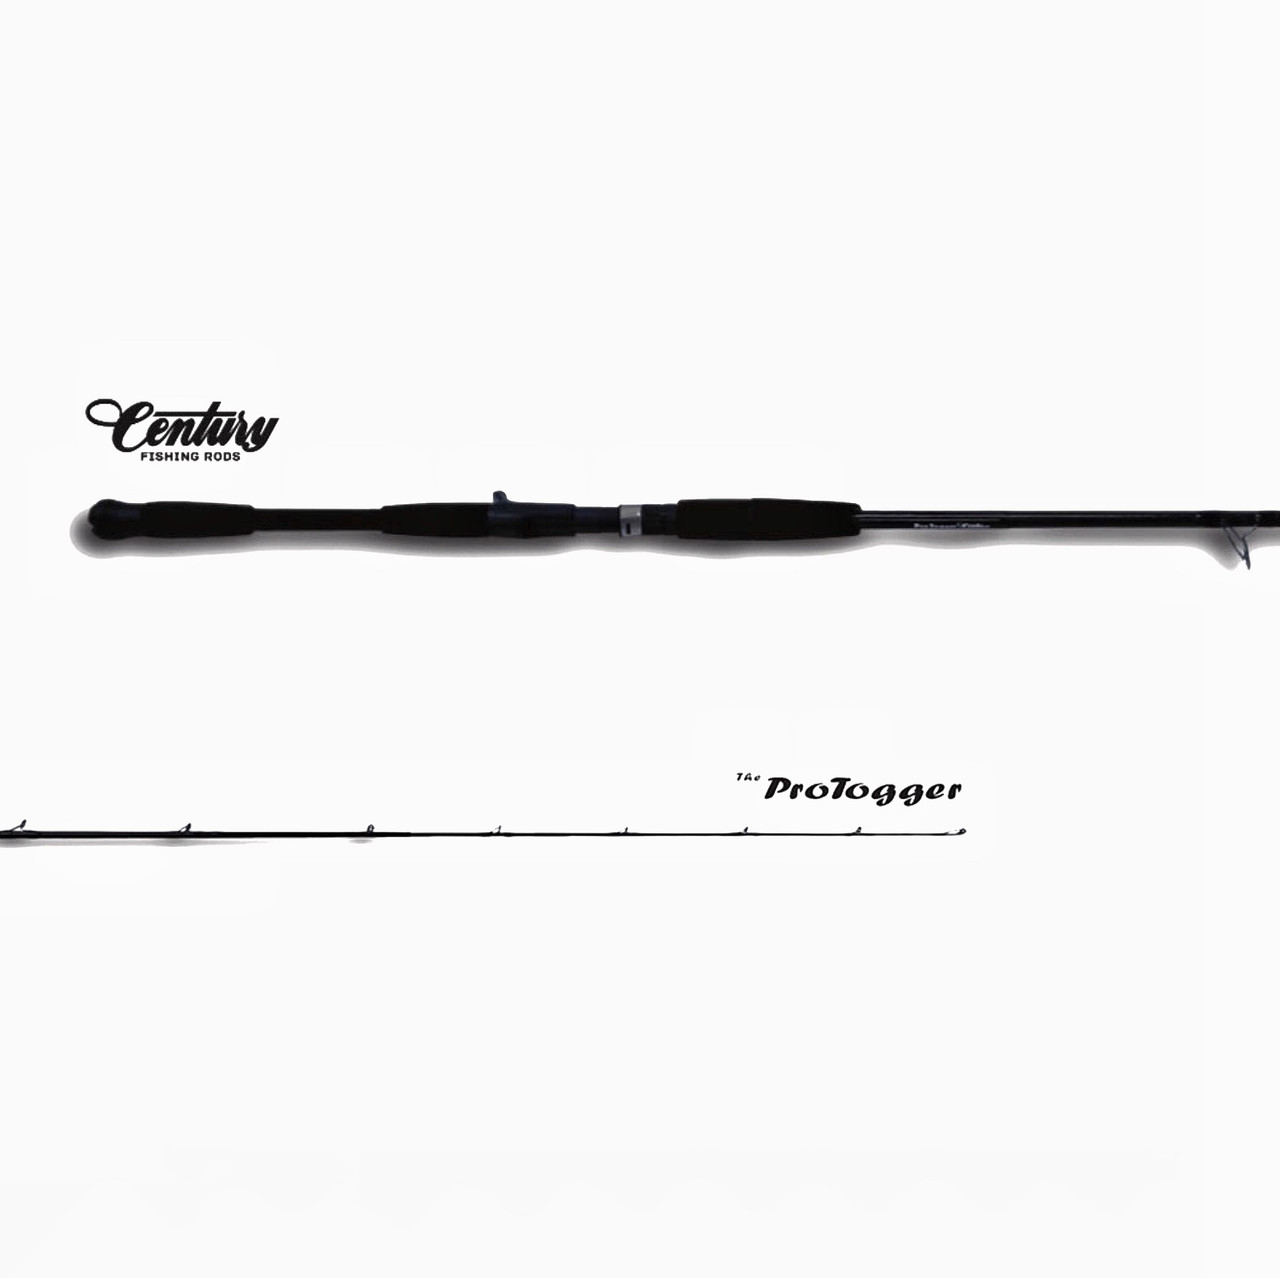 Century Rods Pro Togger Conventional Rod 7'10 1pc, 15-30#, Up to 6oz SS946TC